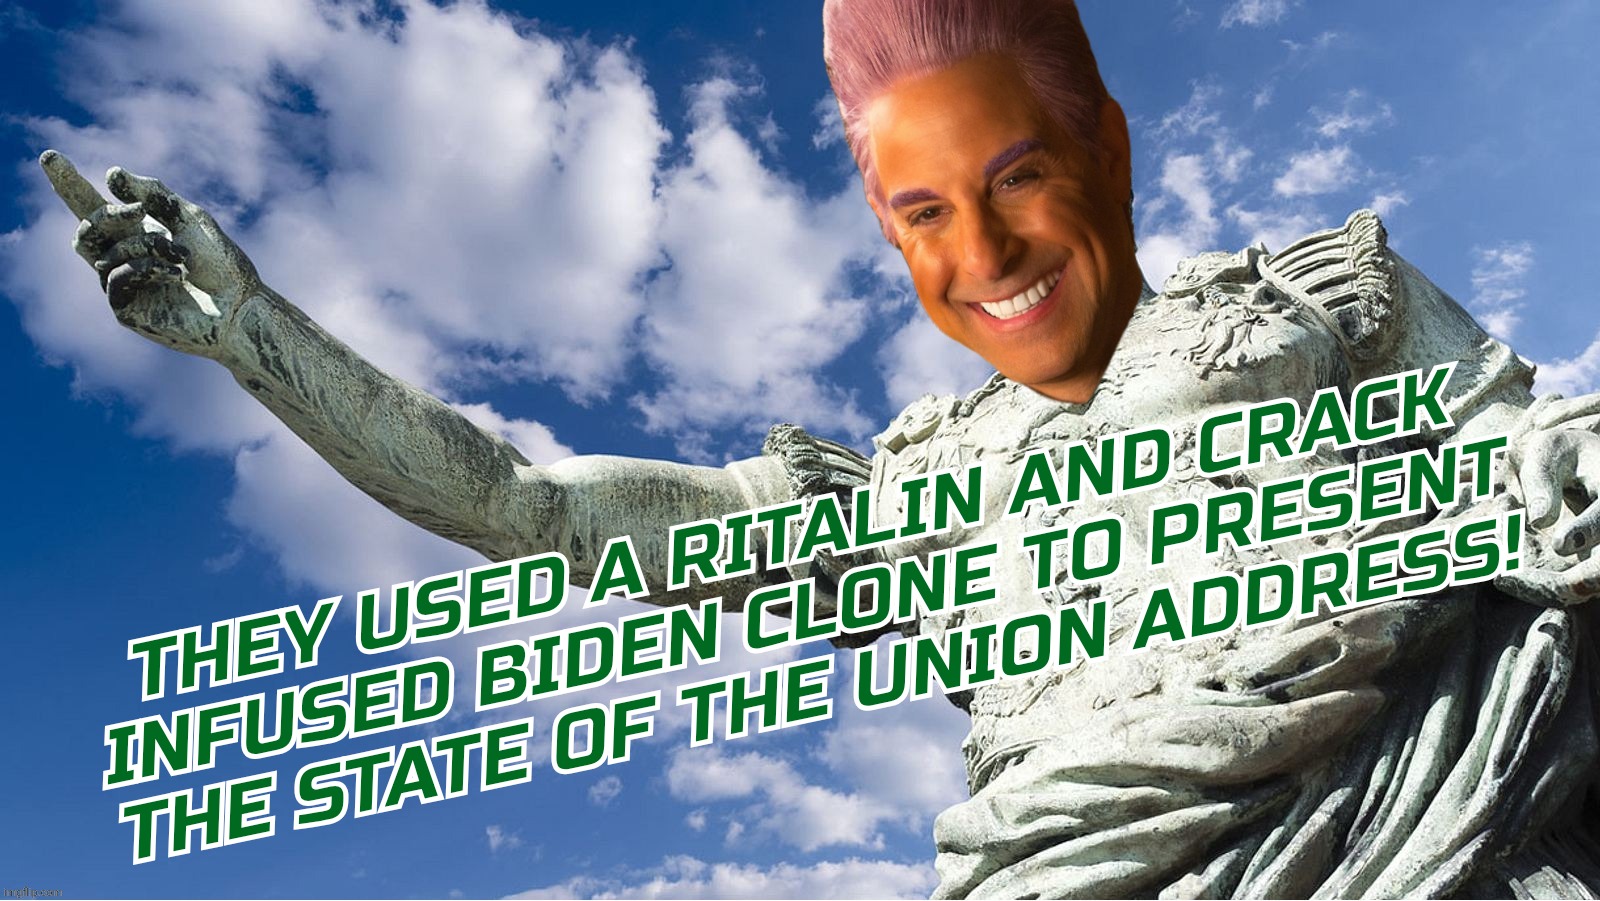 THEY USED A RITALIN AND CRACK
INFUSED BIDEN CLONE TO PRESENT
THE STATE OF THE UNION ADDRESS! | image tagged in caesar flickerman | made w/ Imgflip meme maker